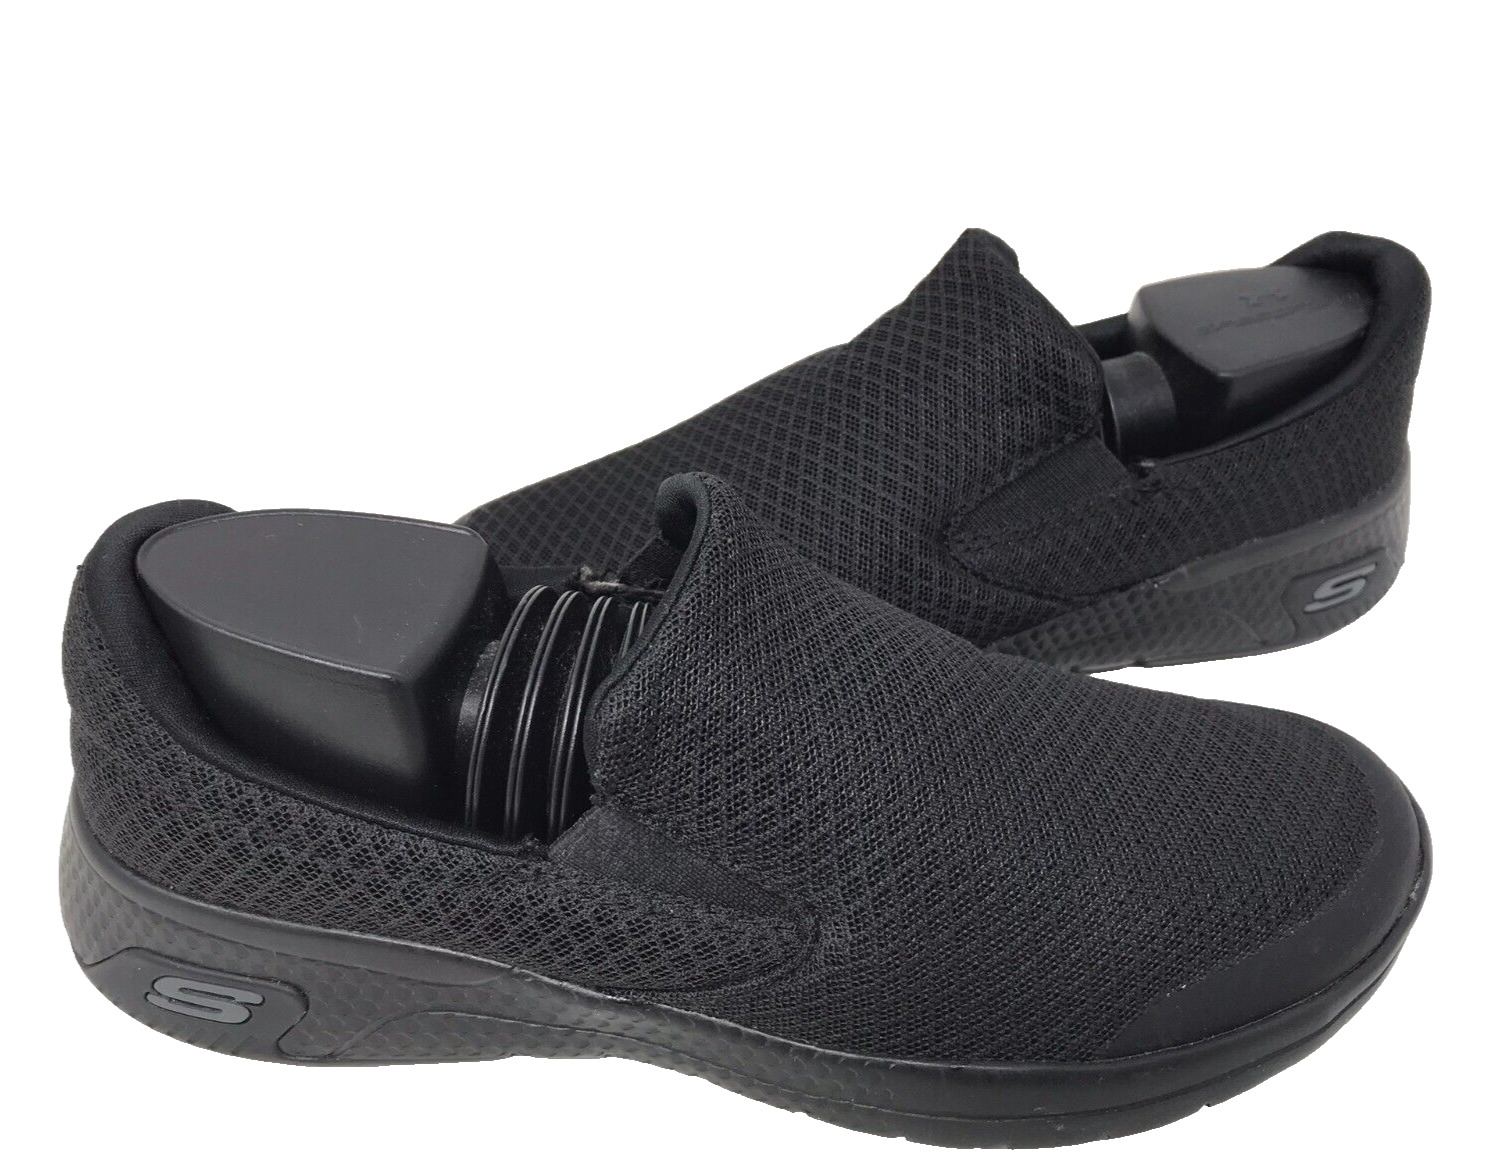 Skechers Women's Work Relaxed Fit Marsing Black Slip On Shoes Size:6 181H